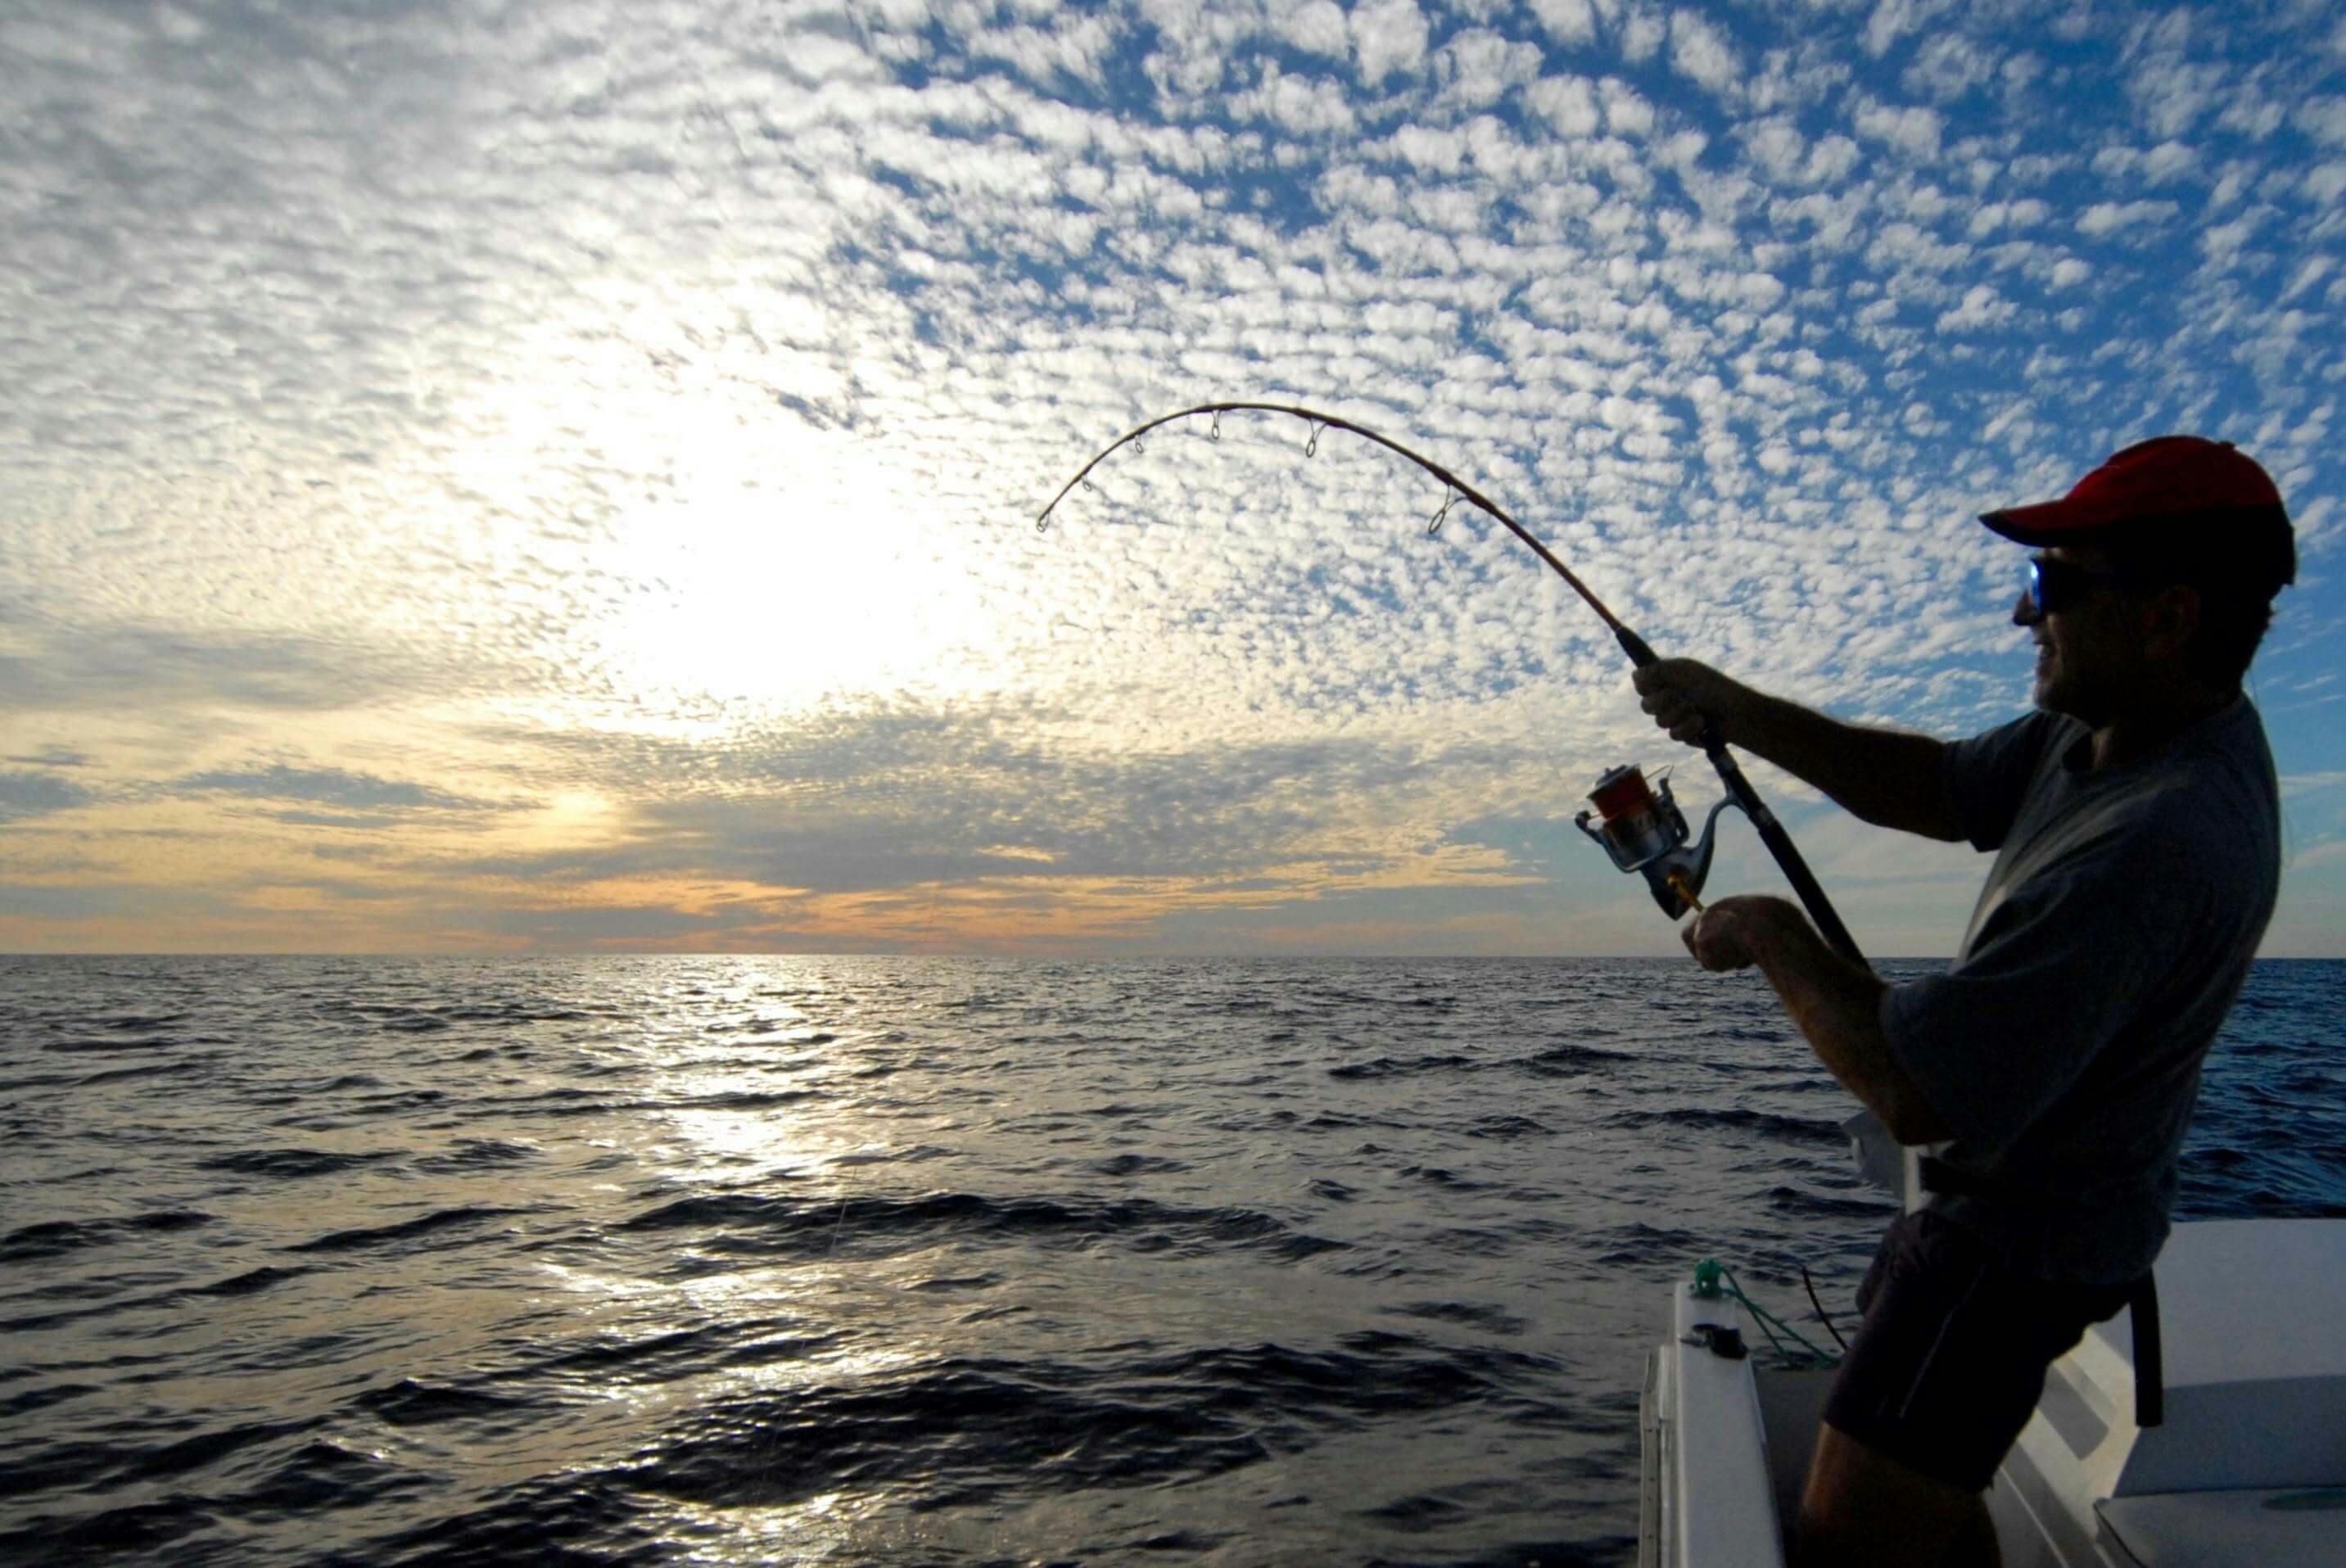 Weather conditions, statistics and analysis of your catches